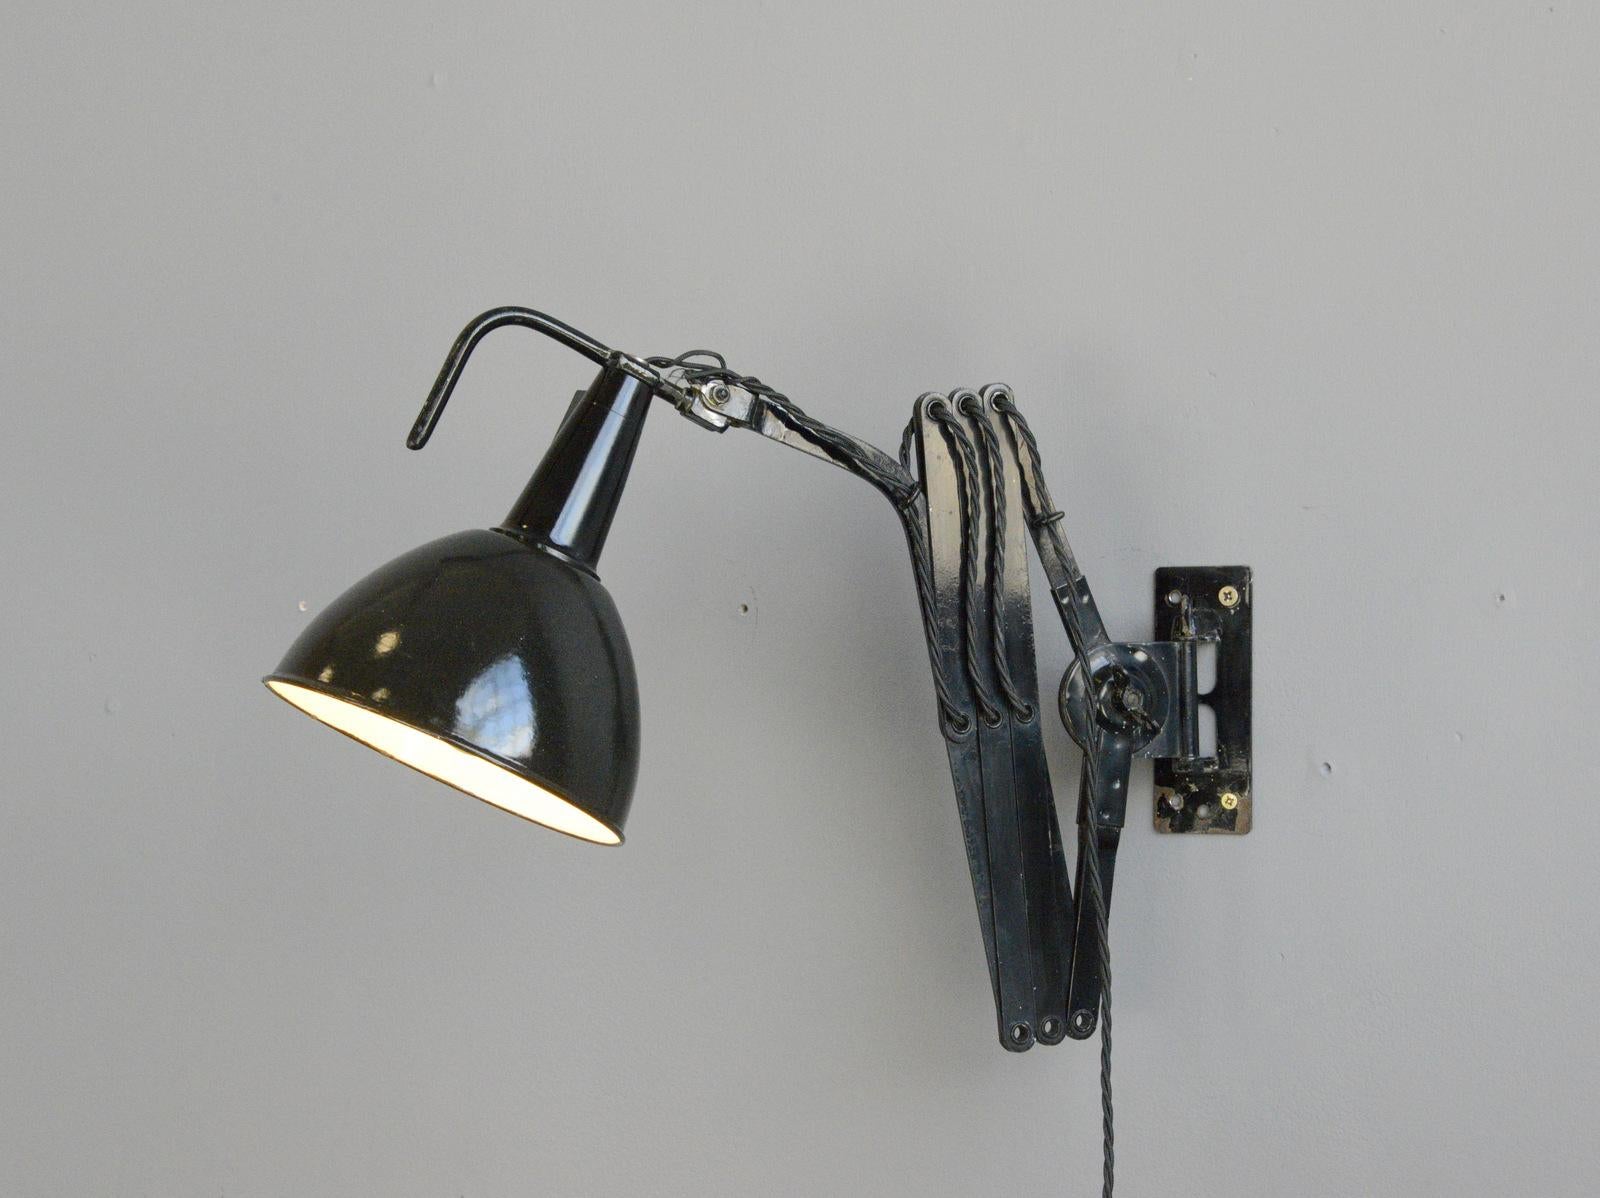 Modernist scissor lamp by Wilhelm Bader, circa 1930s

- Large extendable scissor mechanism 
- Vitreous black enamel shade
- Original on/off switches 
- Takes E27 fitting bulbs
- German, 1930s
- Extends up to 115cm from the wall
- Measures: